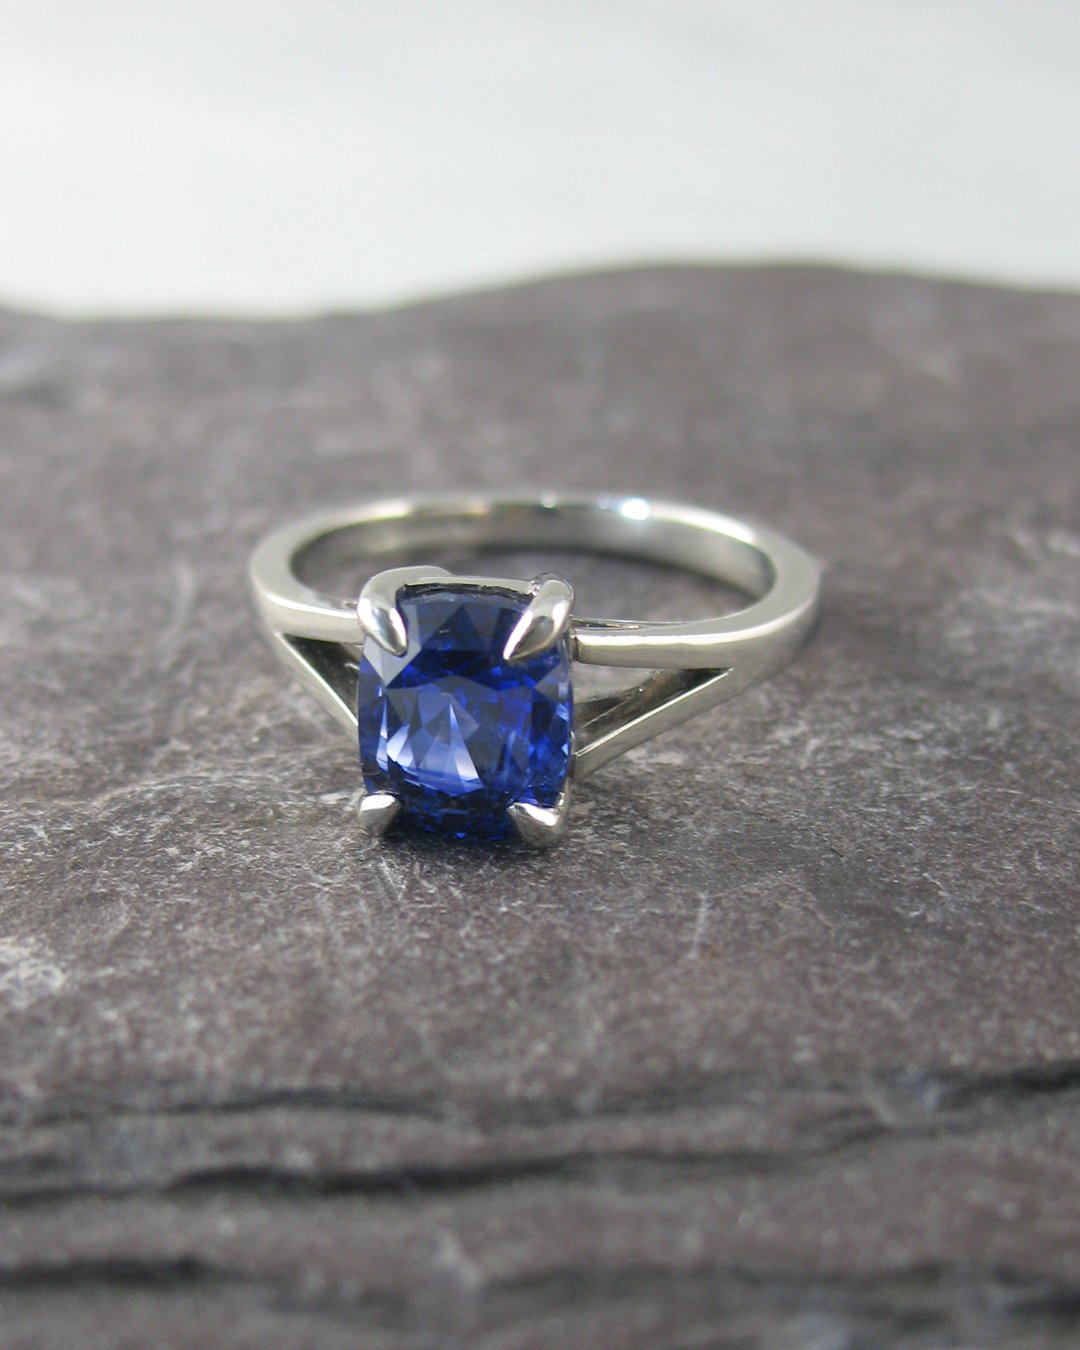 A gorgeous cushion shaped sapphire engagement ring